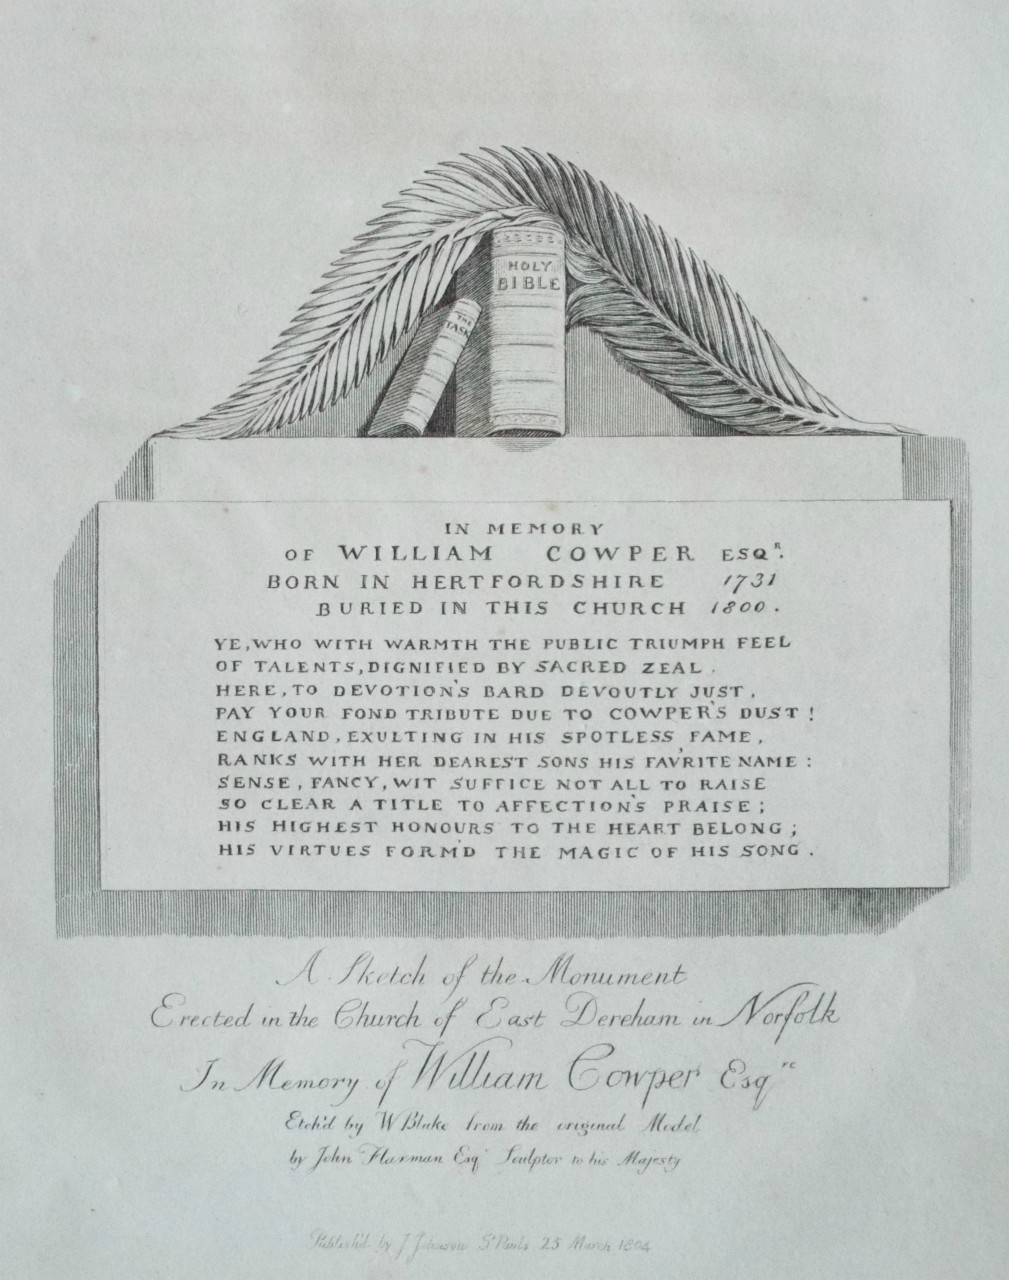 Print - A Sketch of the Monument Erected in the Church of East Dereham in Norfolk In Memory of William Cowper Esqr. - Blake